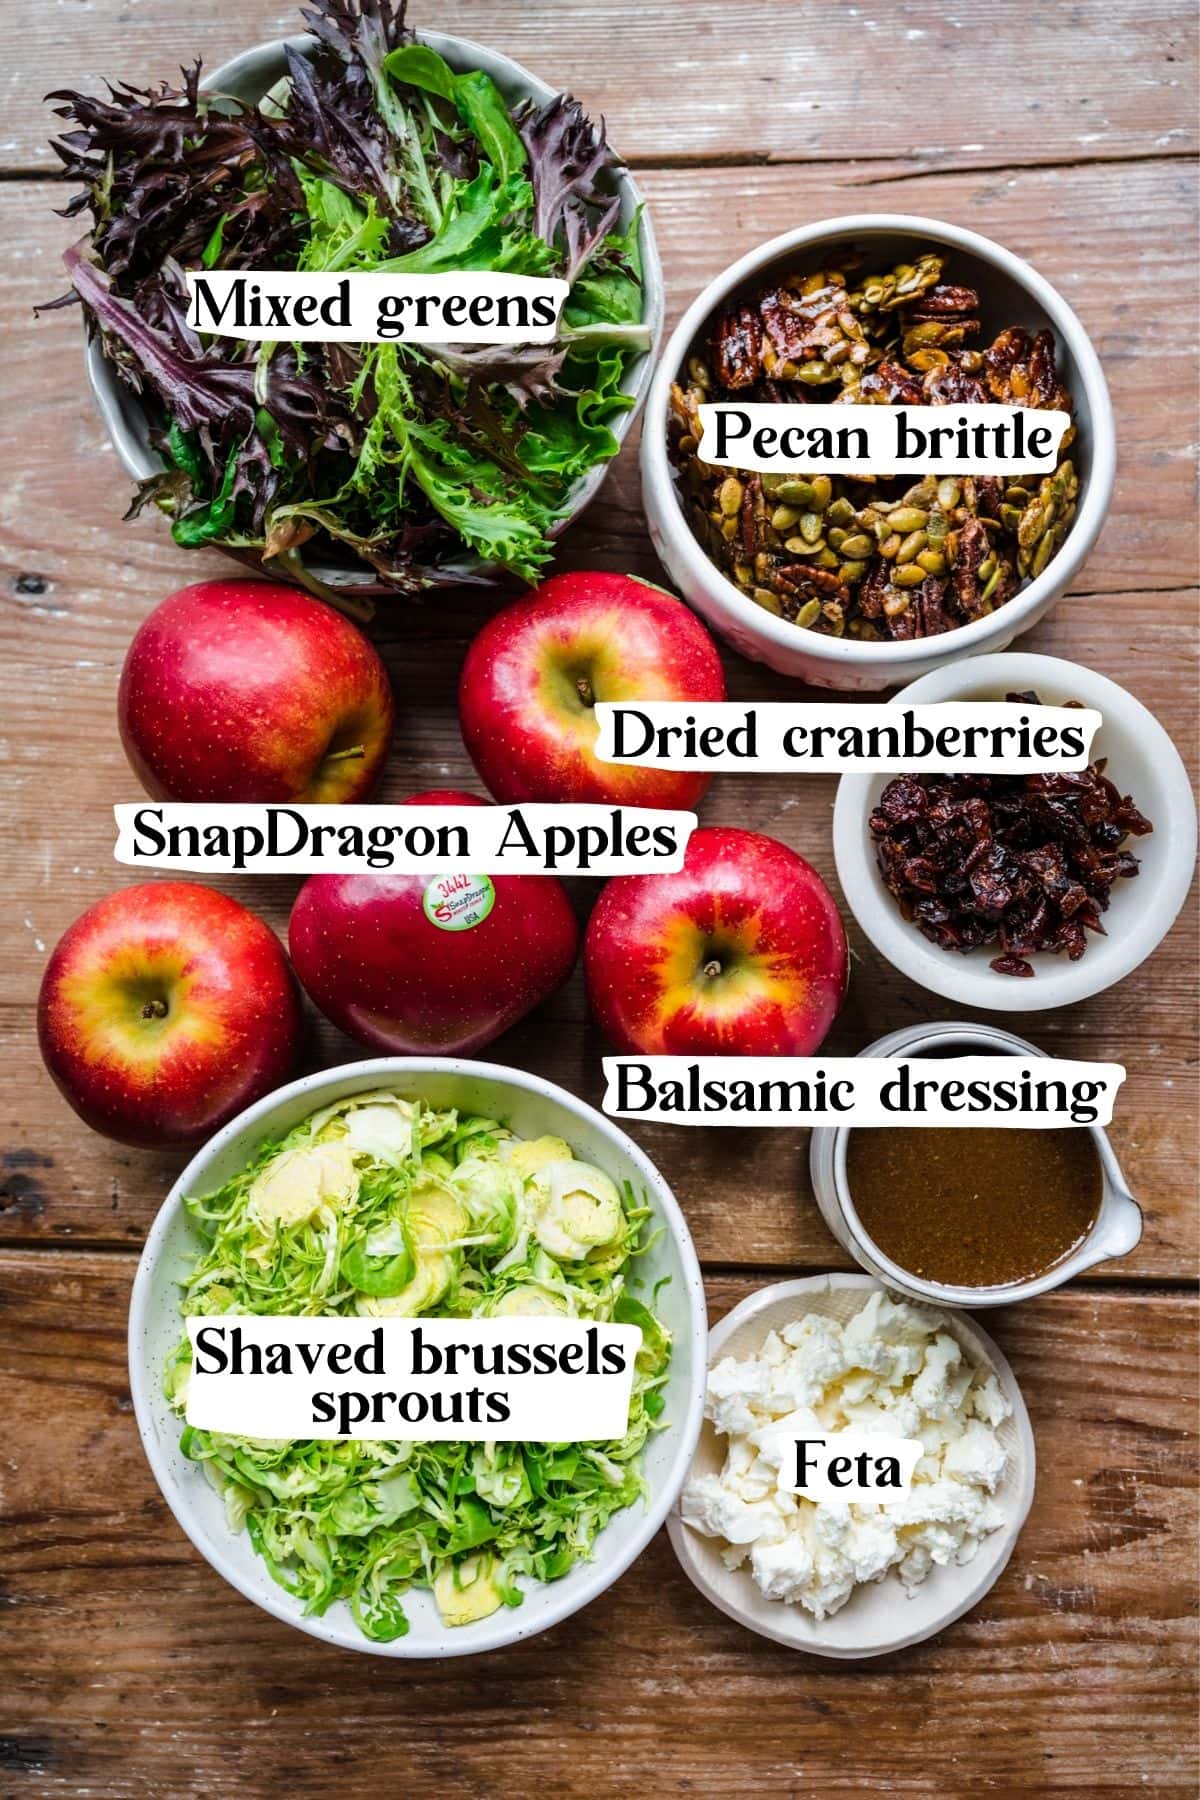 Overhead view of salad ingredients, including apples, greens, and balsamic dressing.